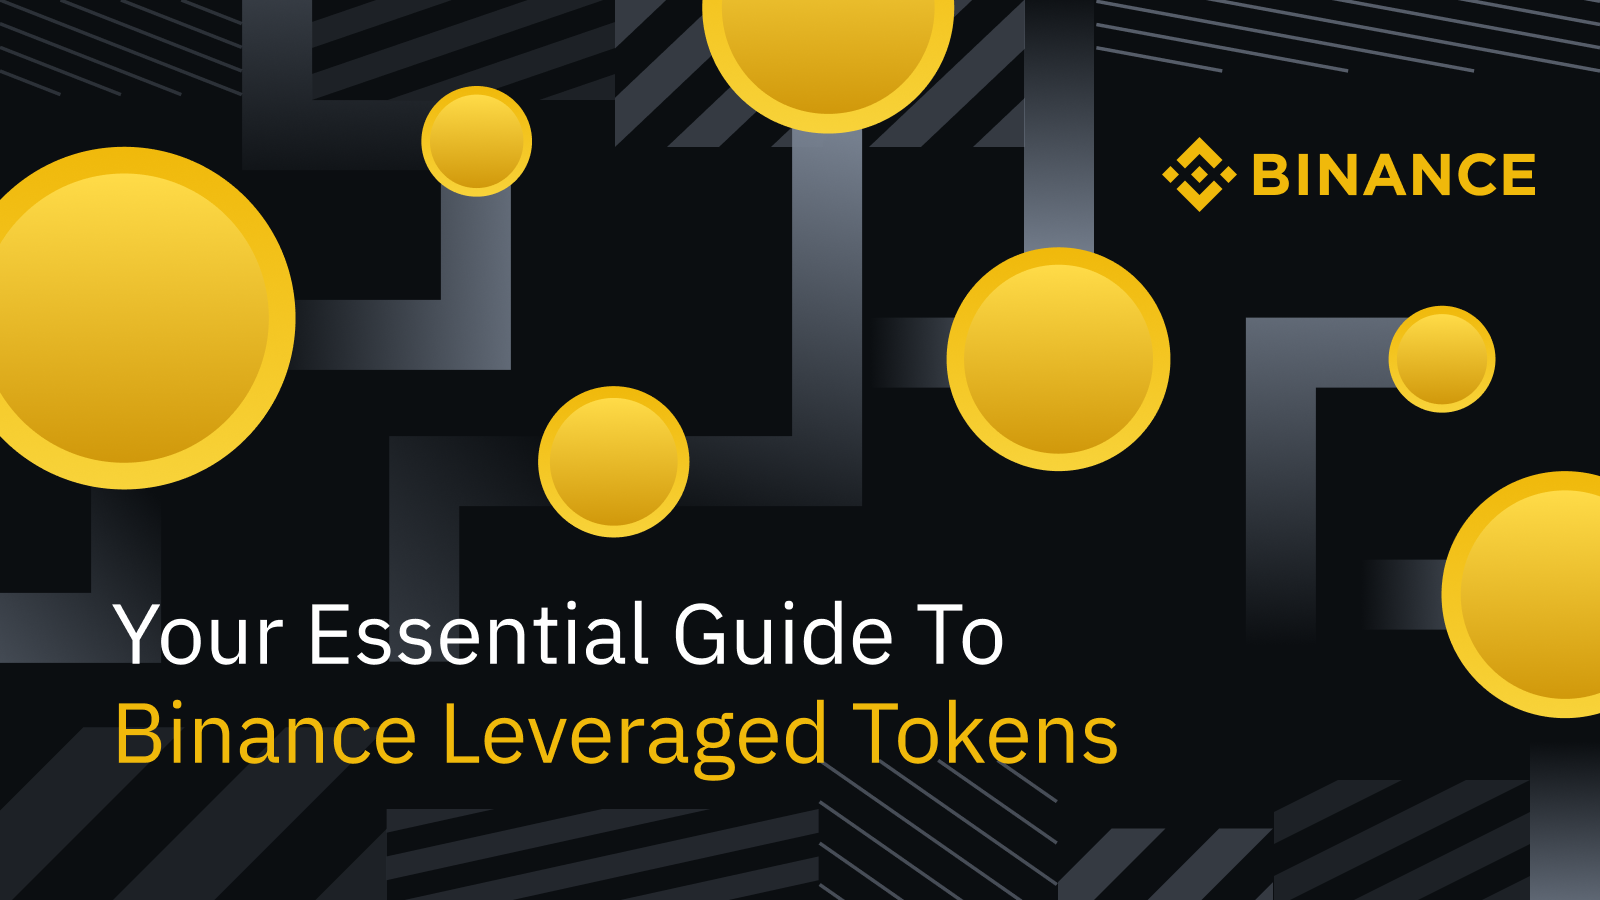 Your Essential Guide To Binance Leveraged Tokens